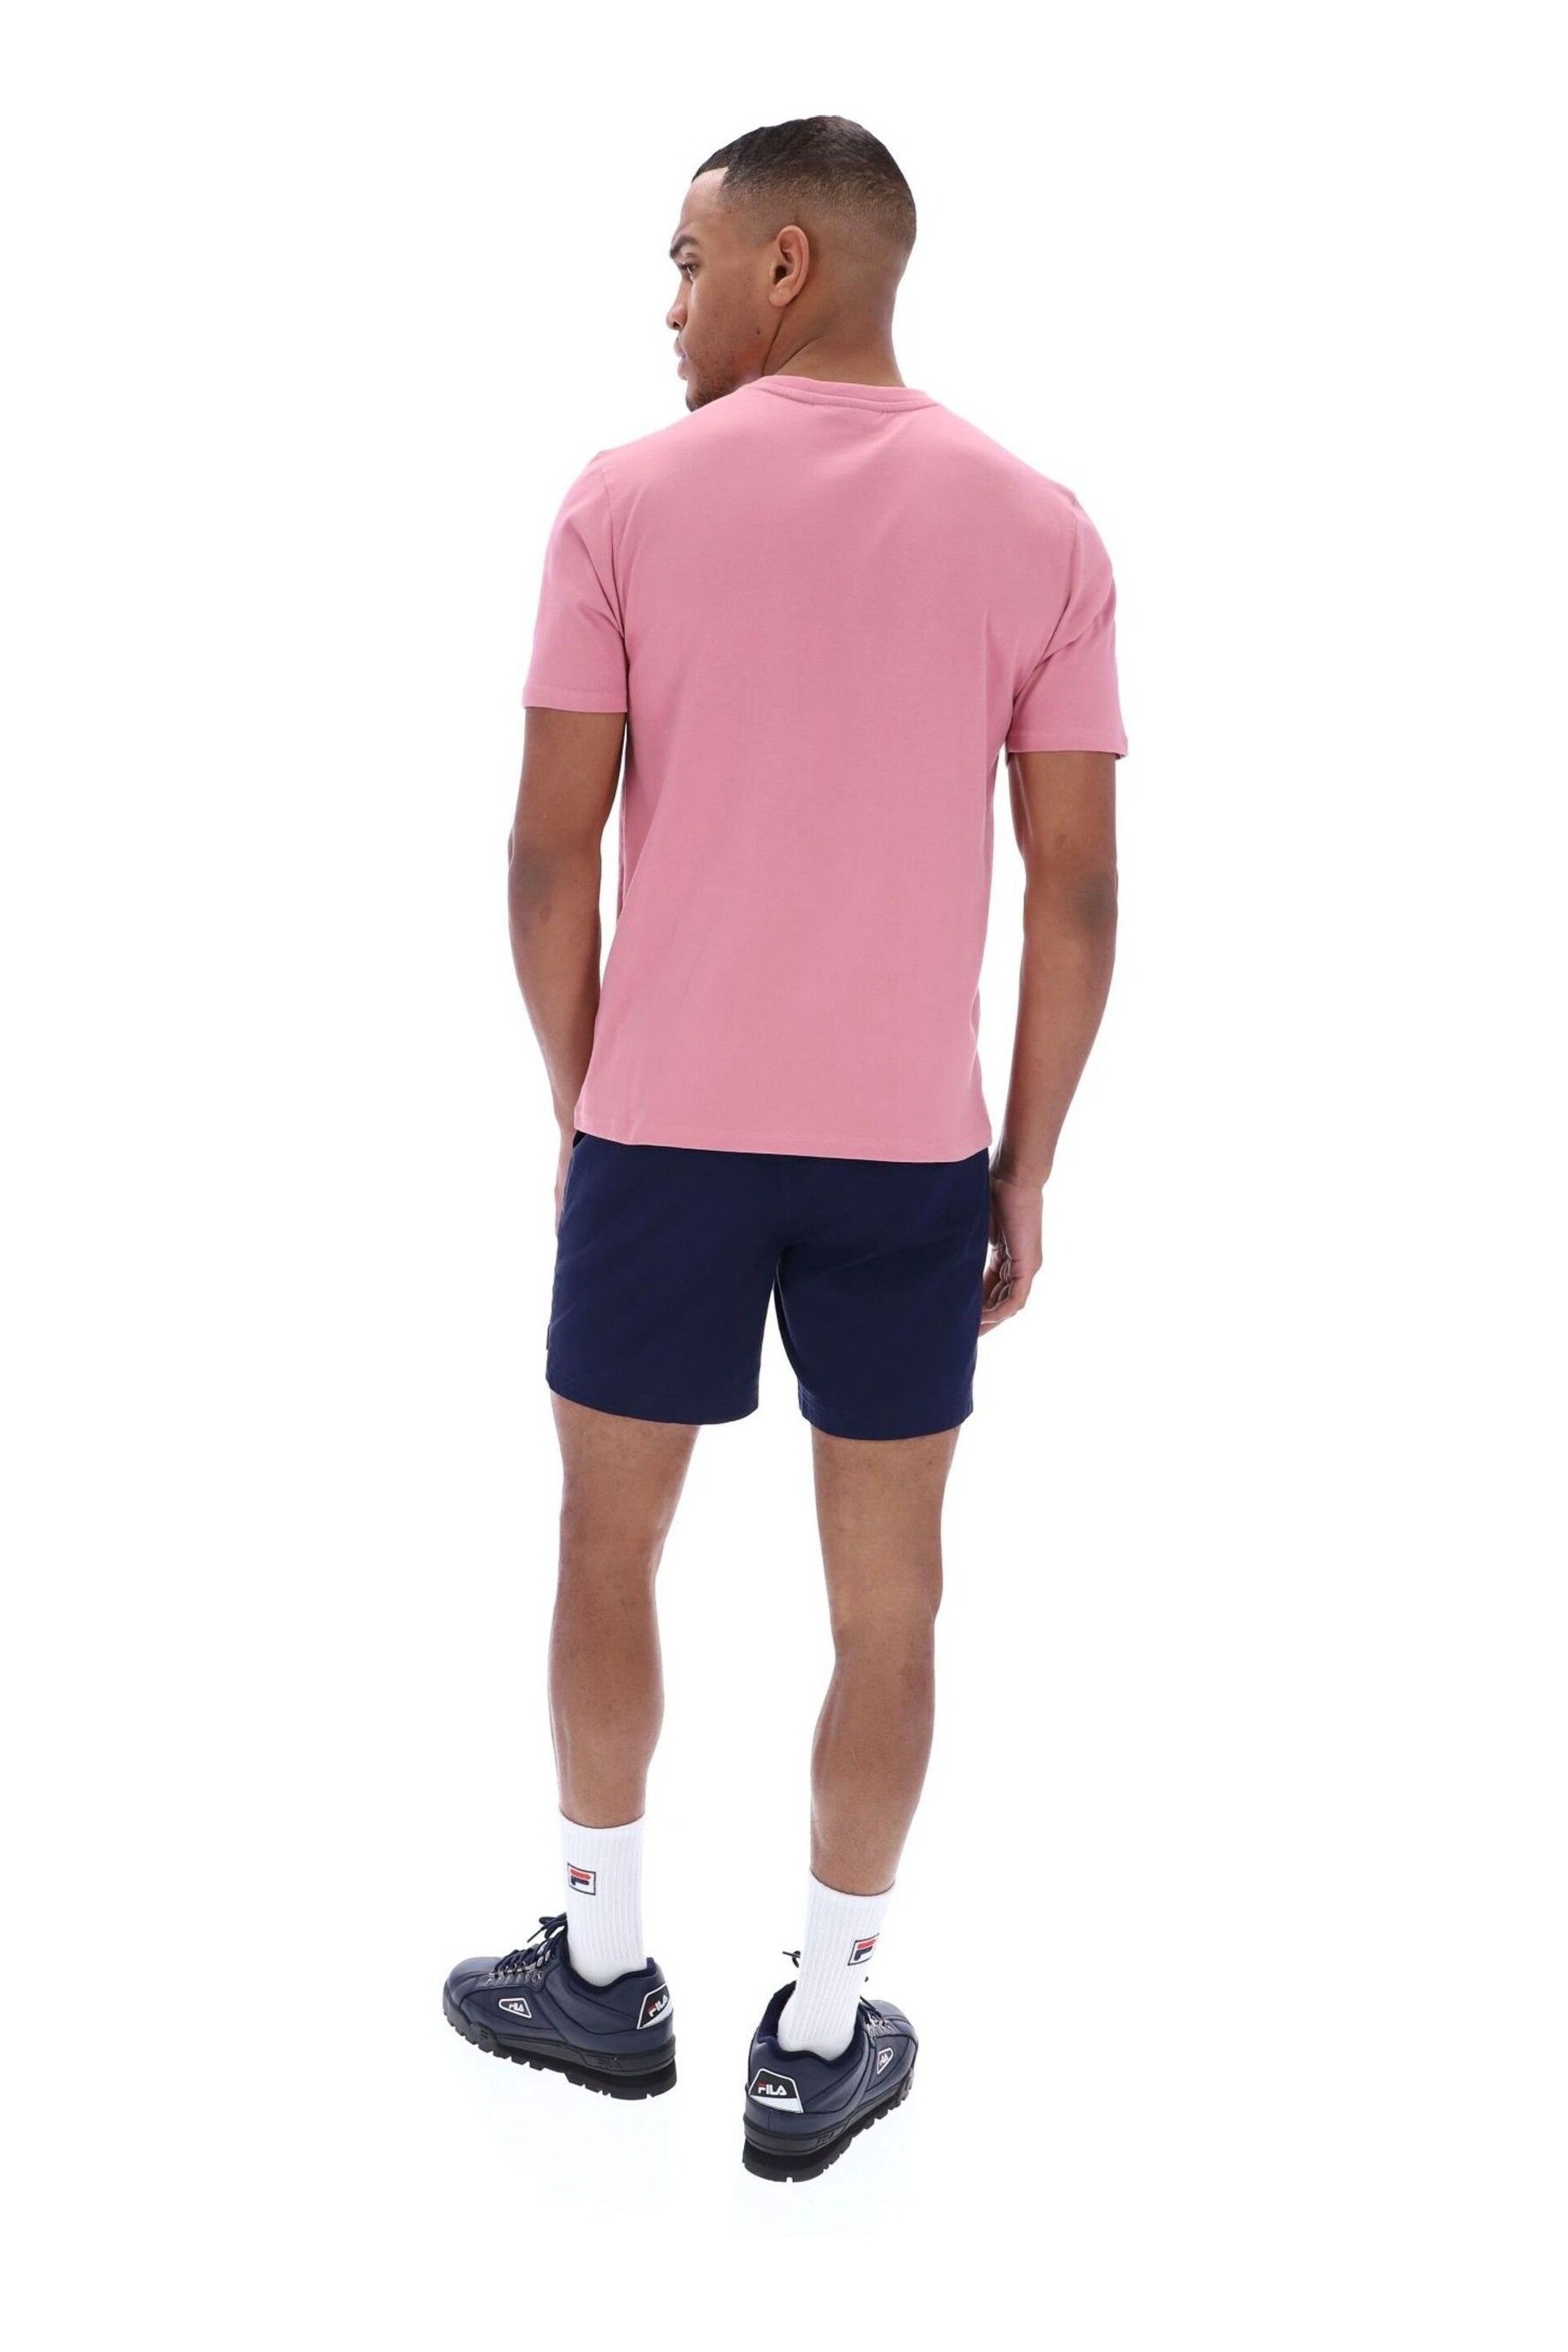 Fila Pink Sunny 2 Essential T-Shirt With Narrow Collar Rib - Image 3 of 4